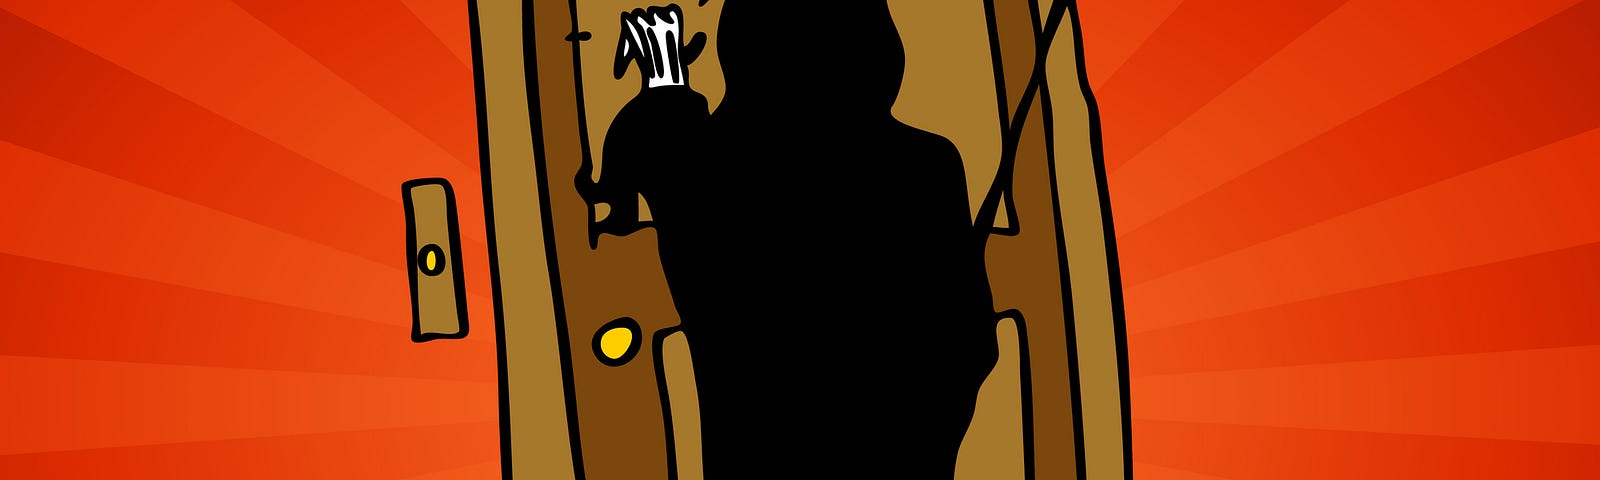 Illustration of the Grim Reaper knocking on a door